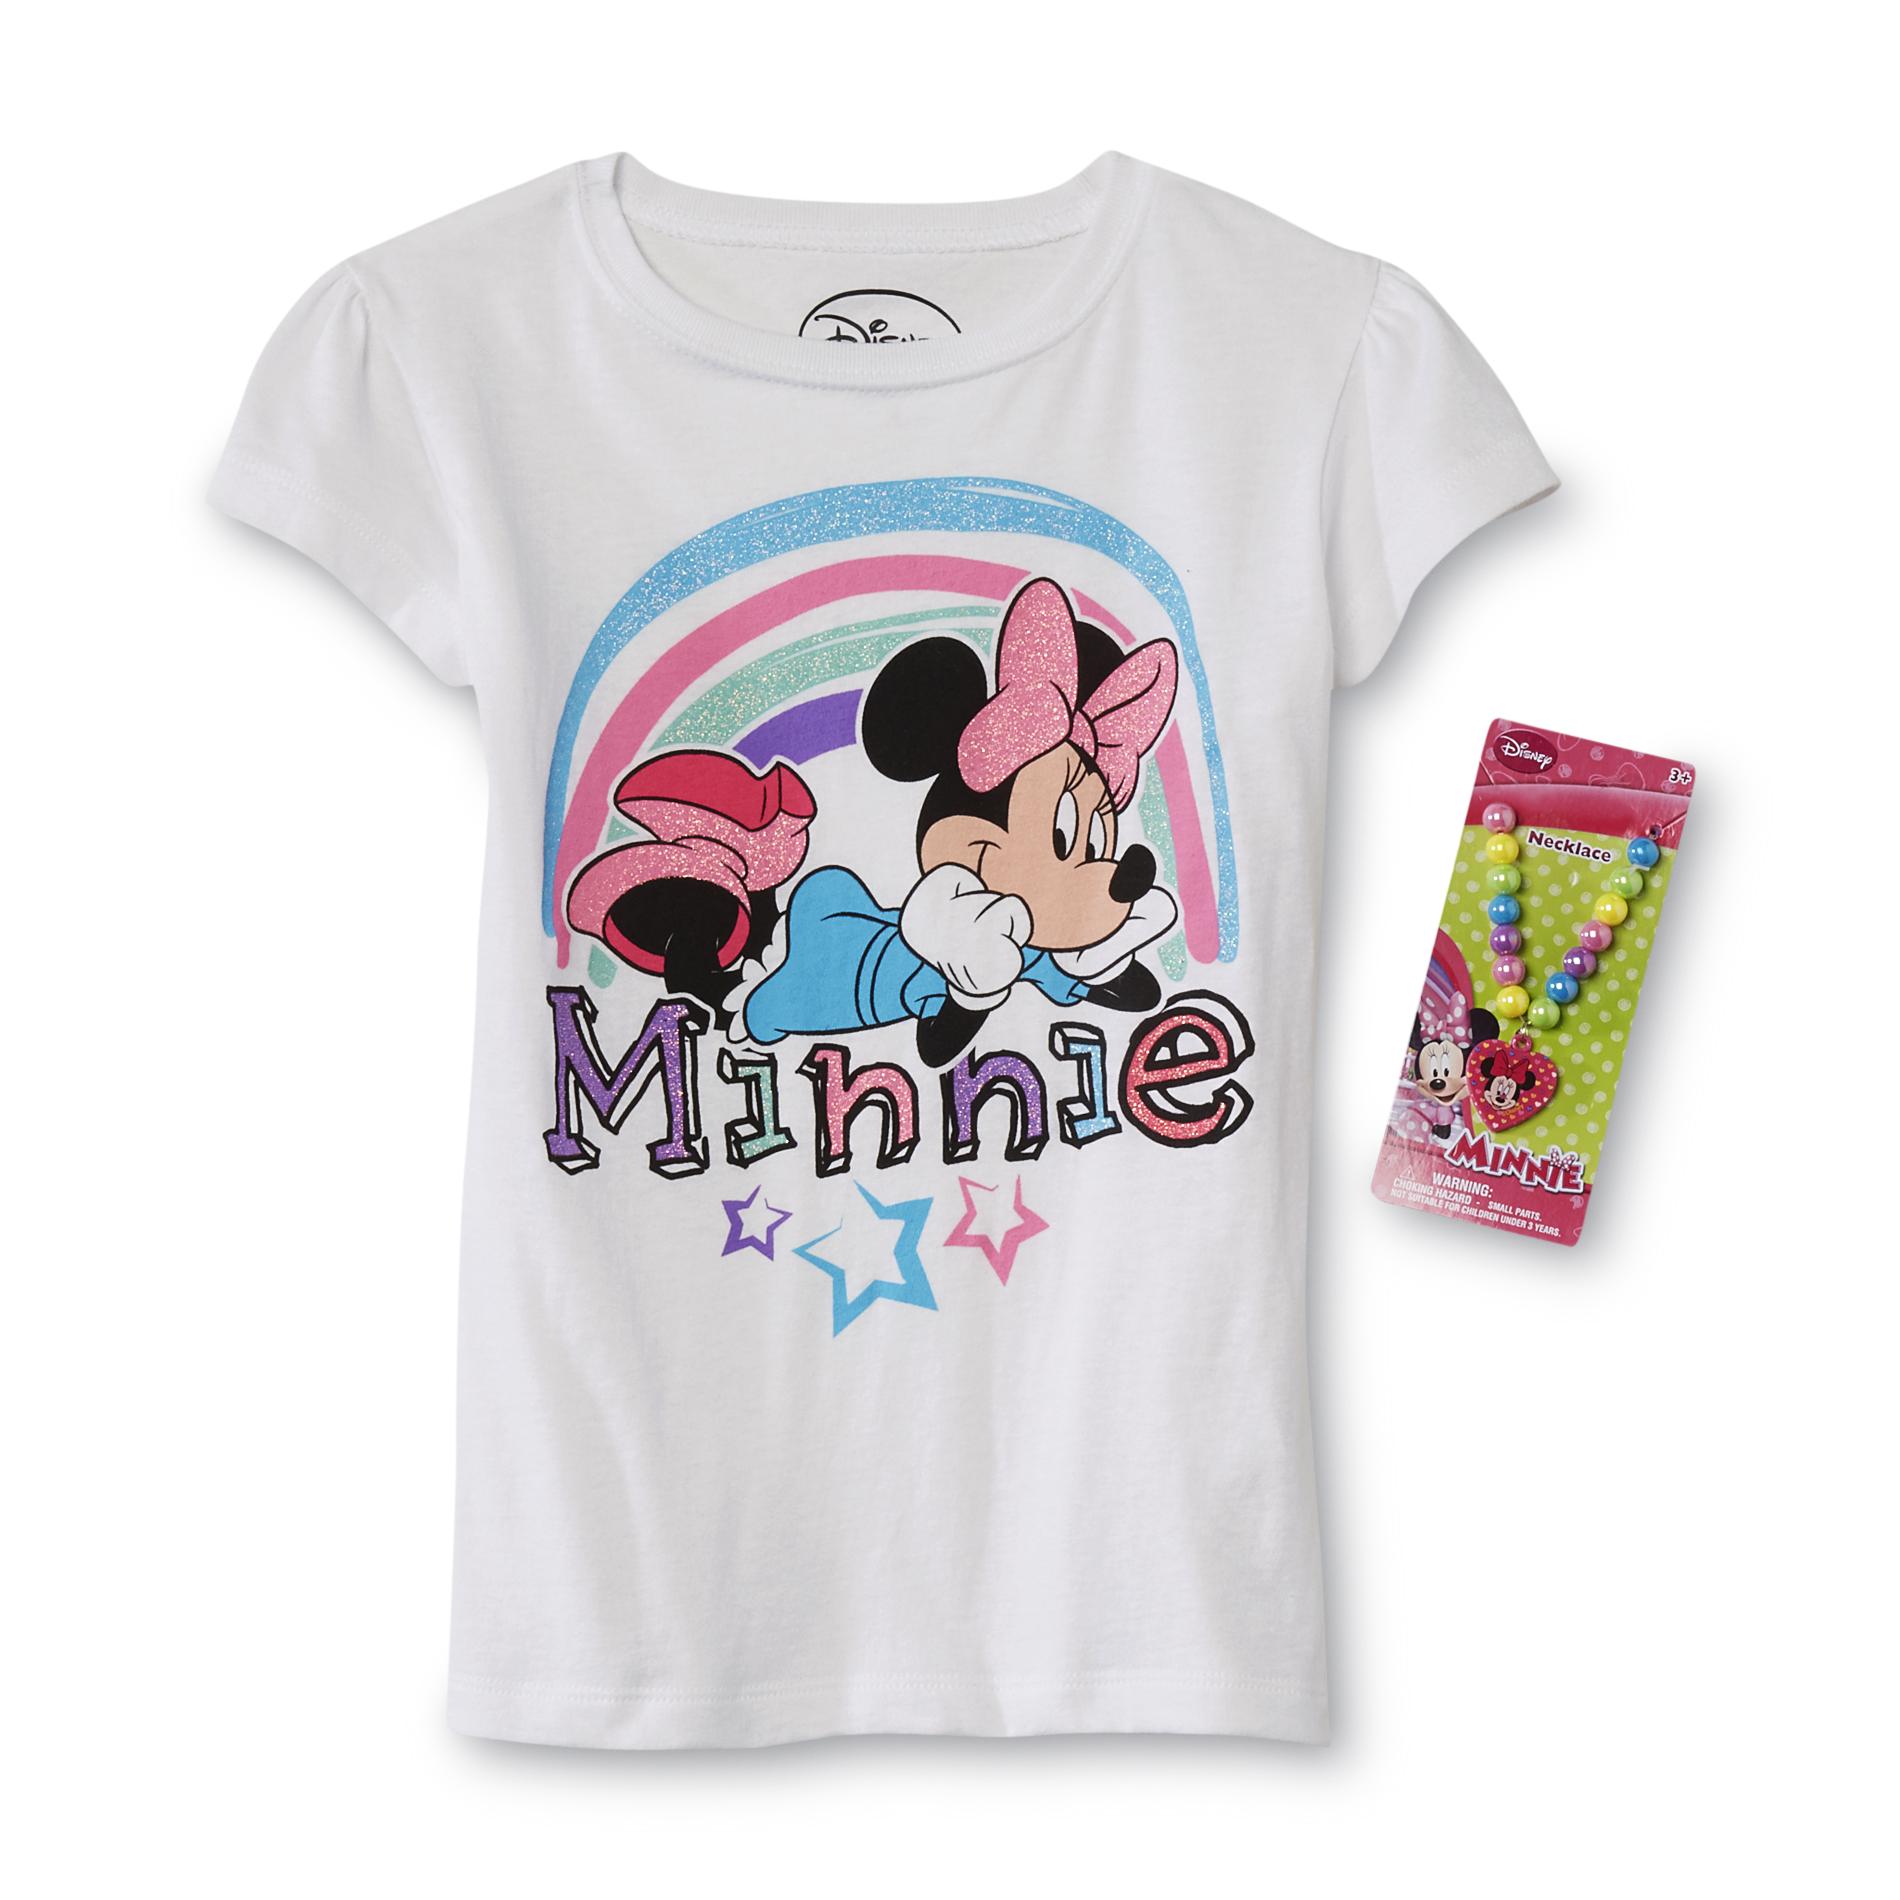 Disney Minnie Mouse Girl's T-Shirt & Necklace